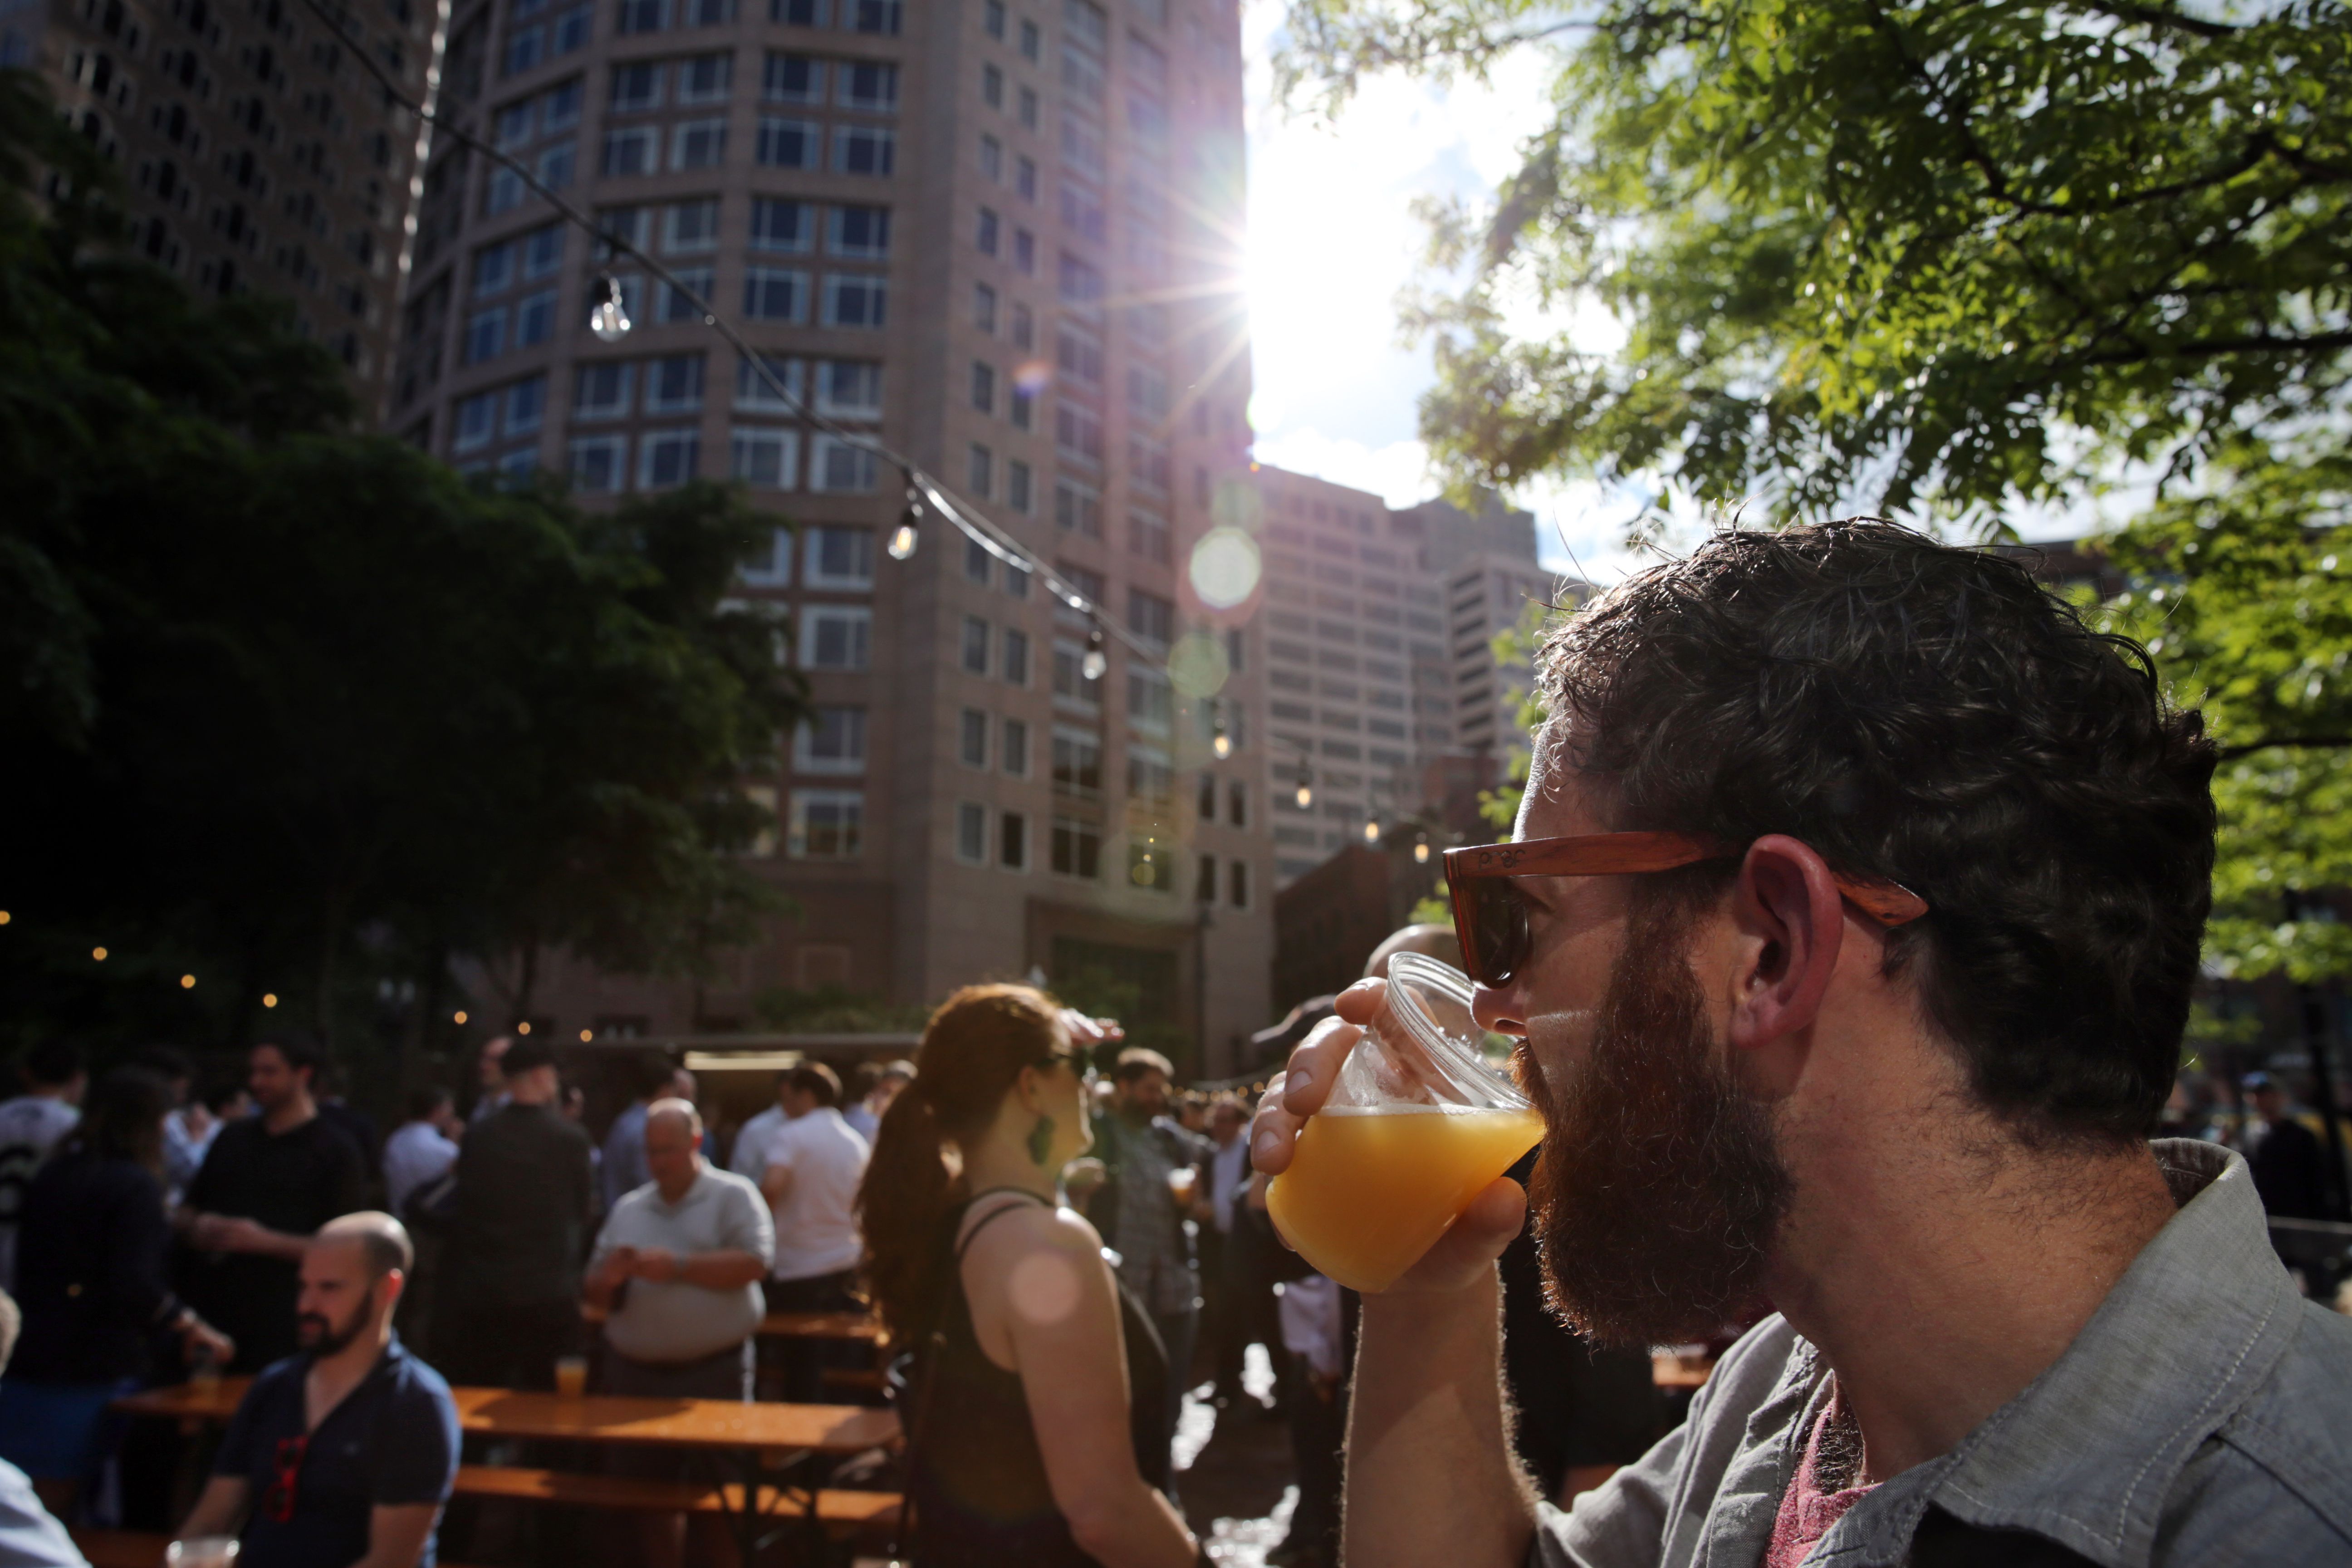 I Love Beer Too But State Needs To Regulate Beer Gardens The